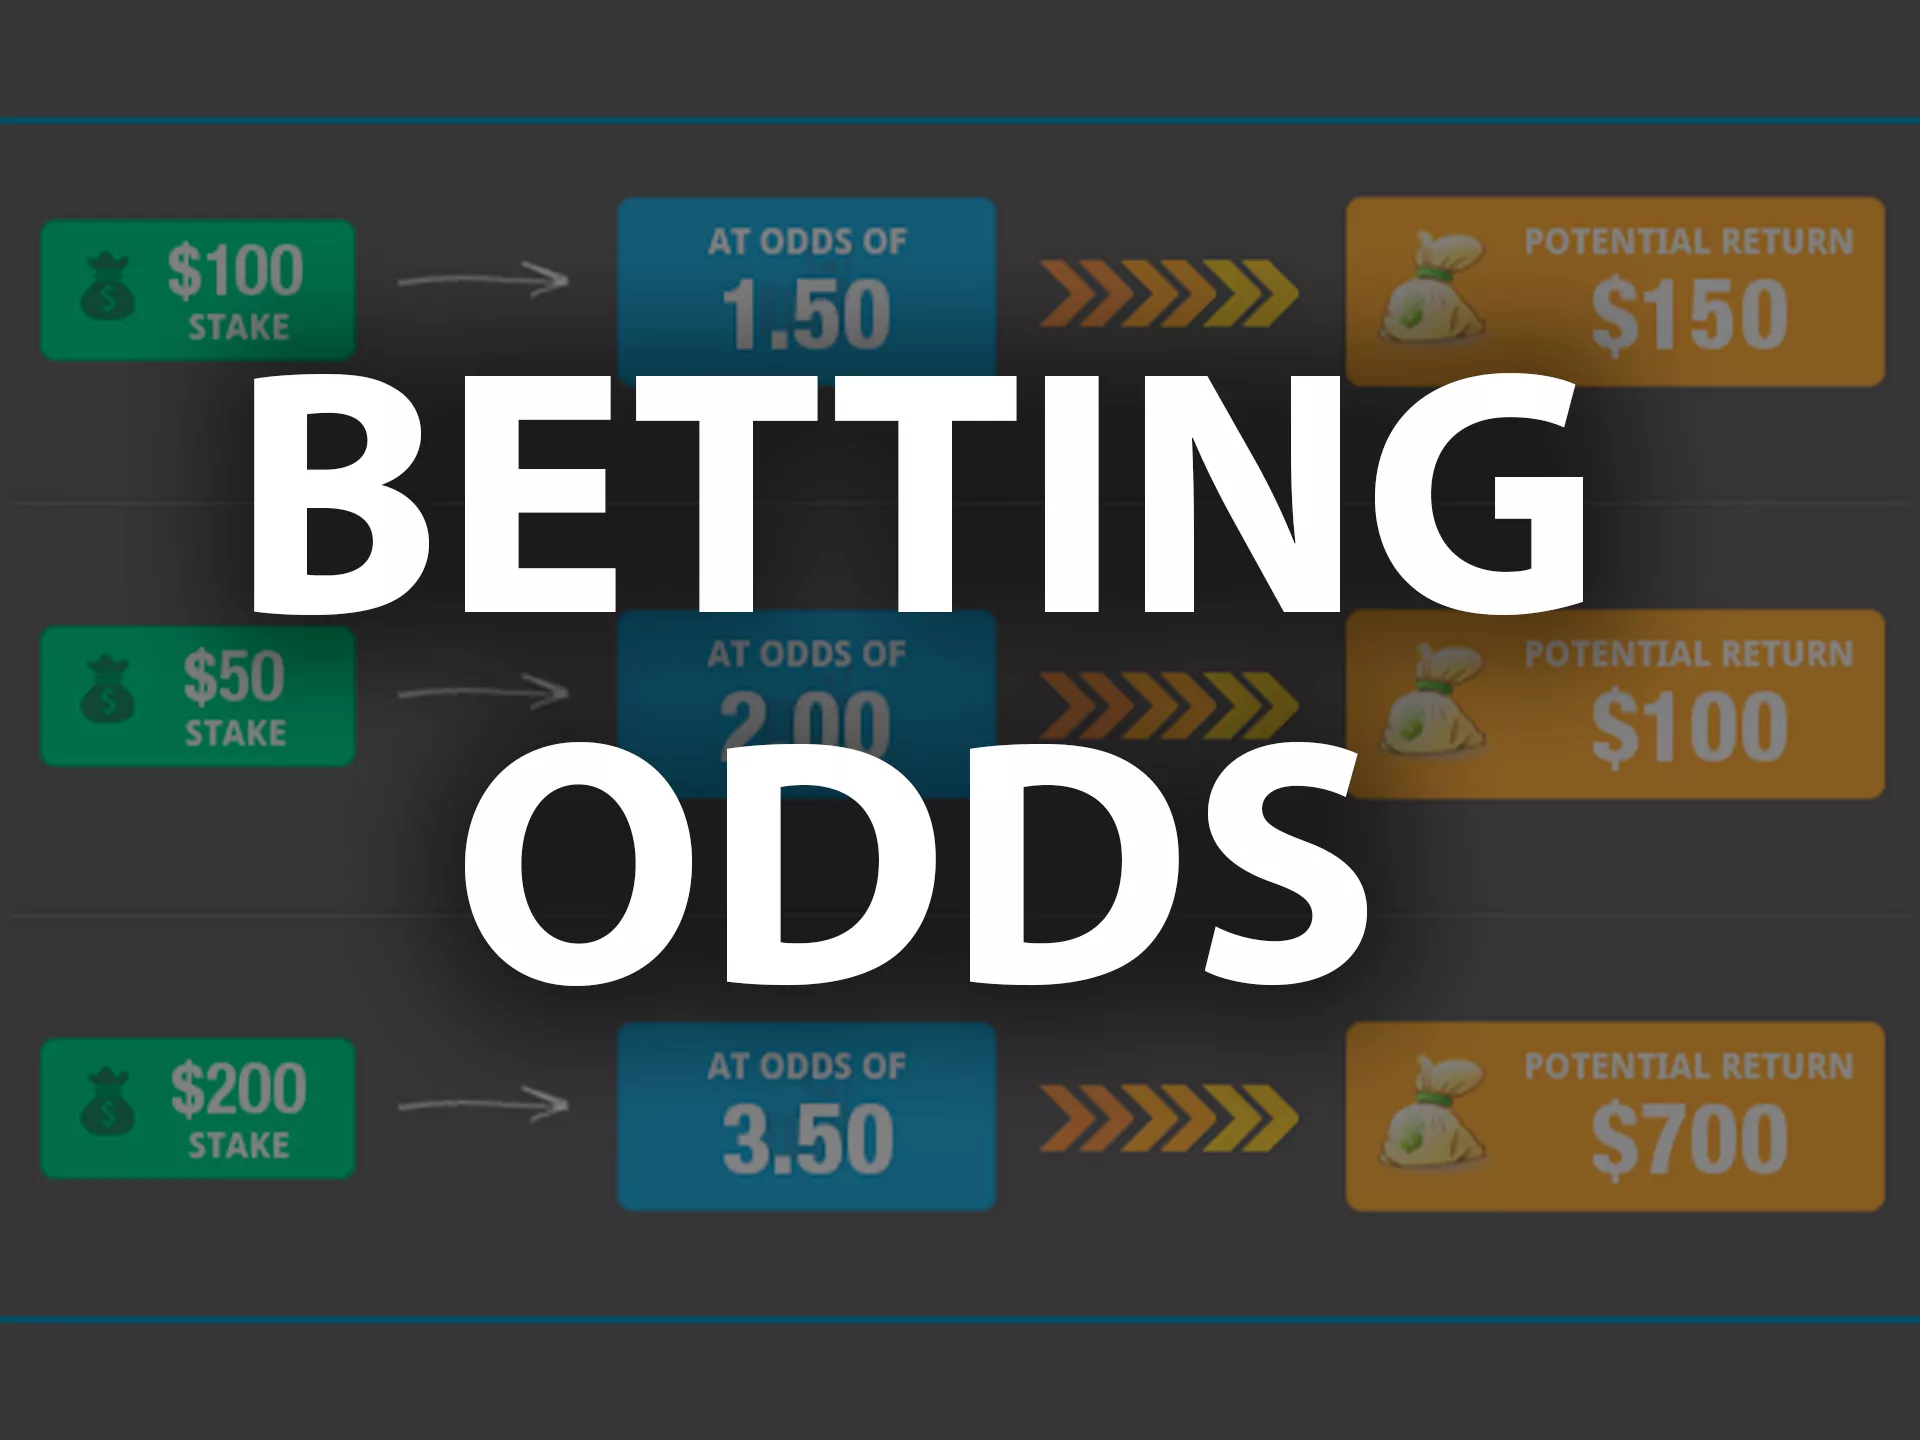 Betcity shows profitable betting odds on most of the sport events.